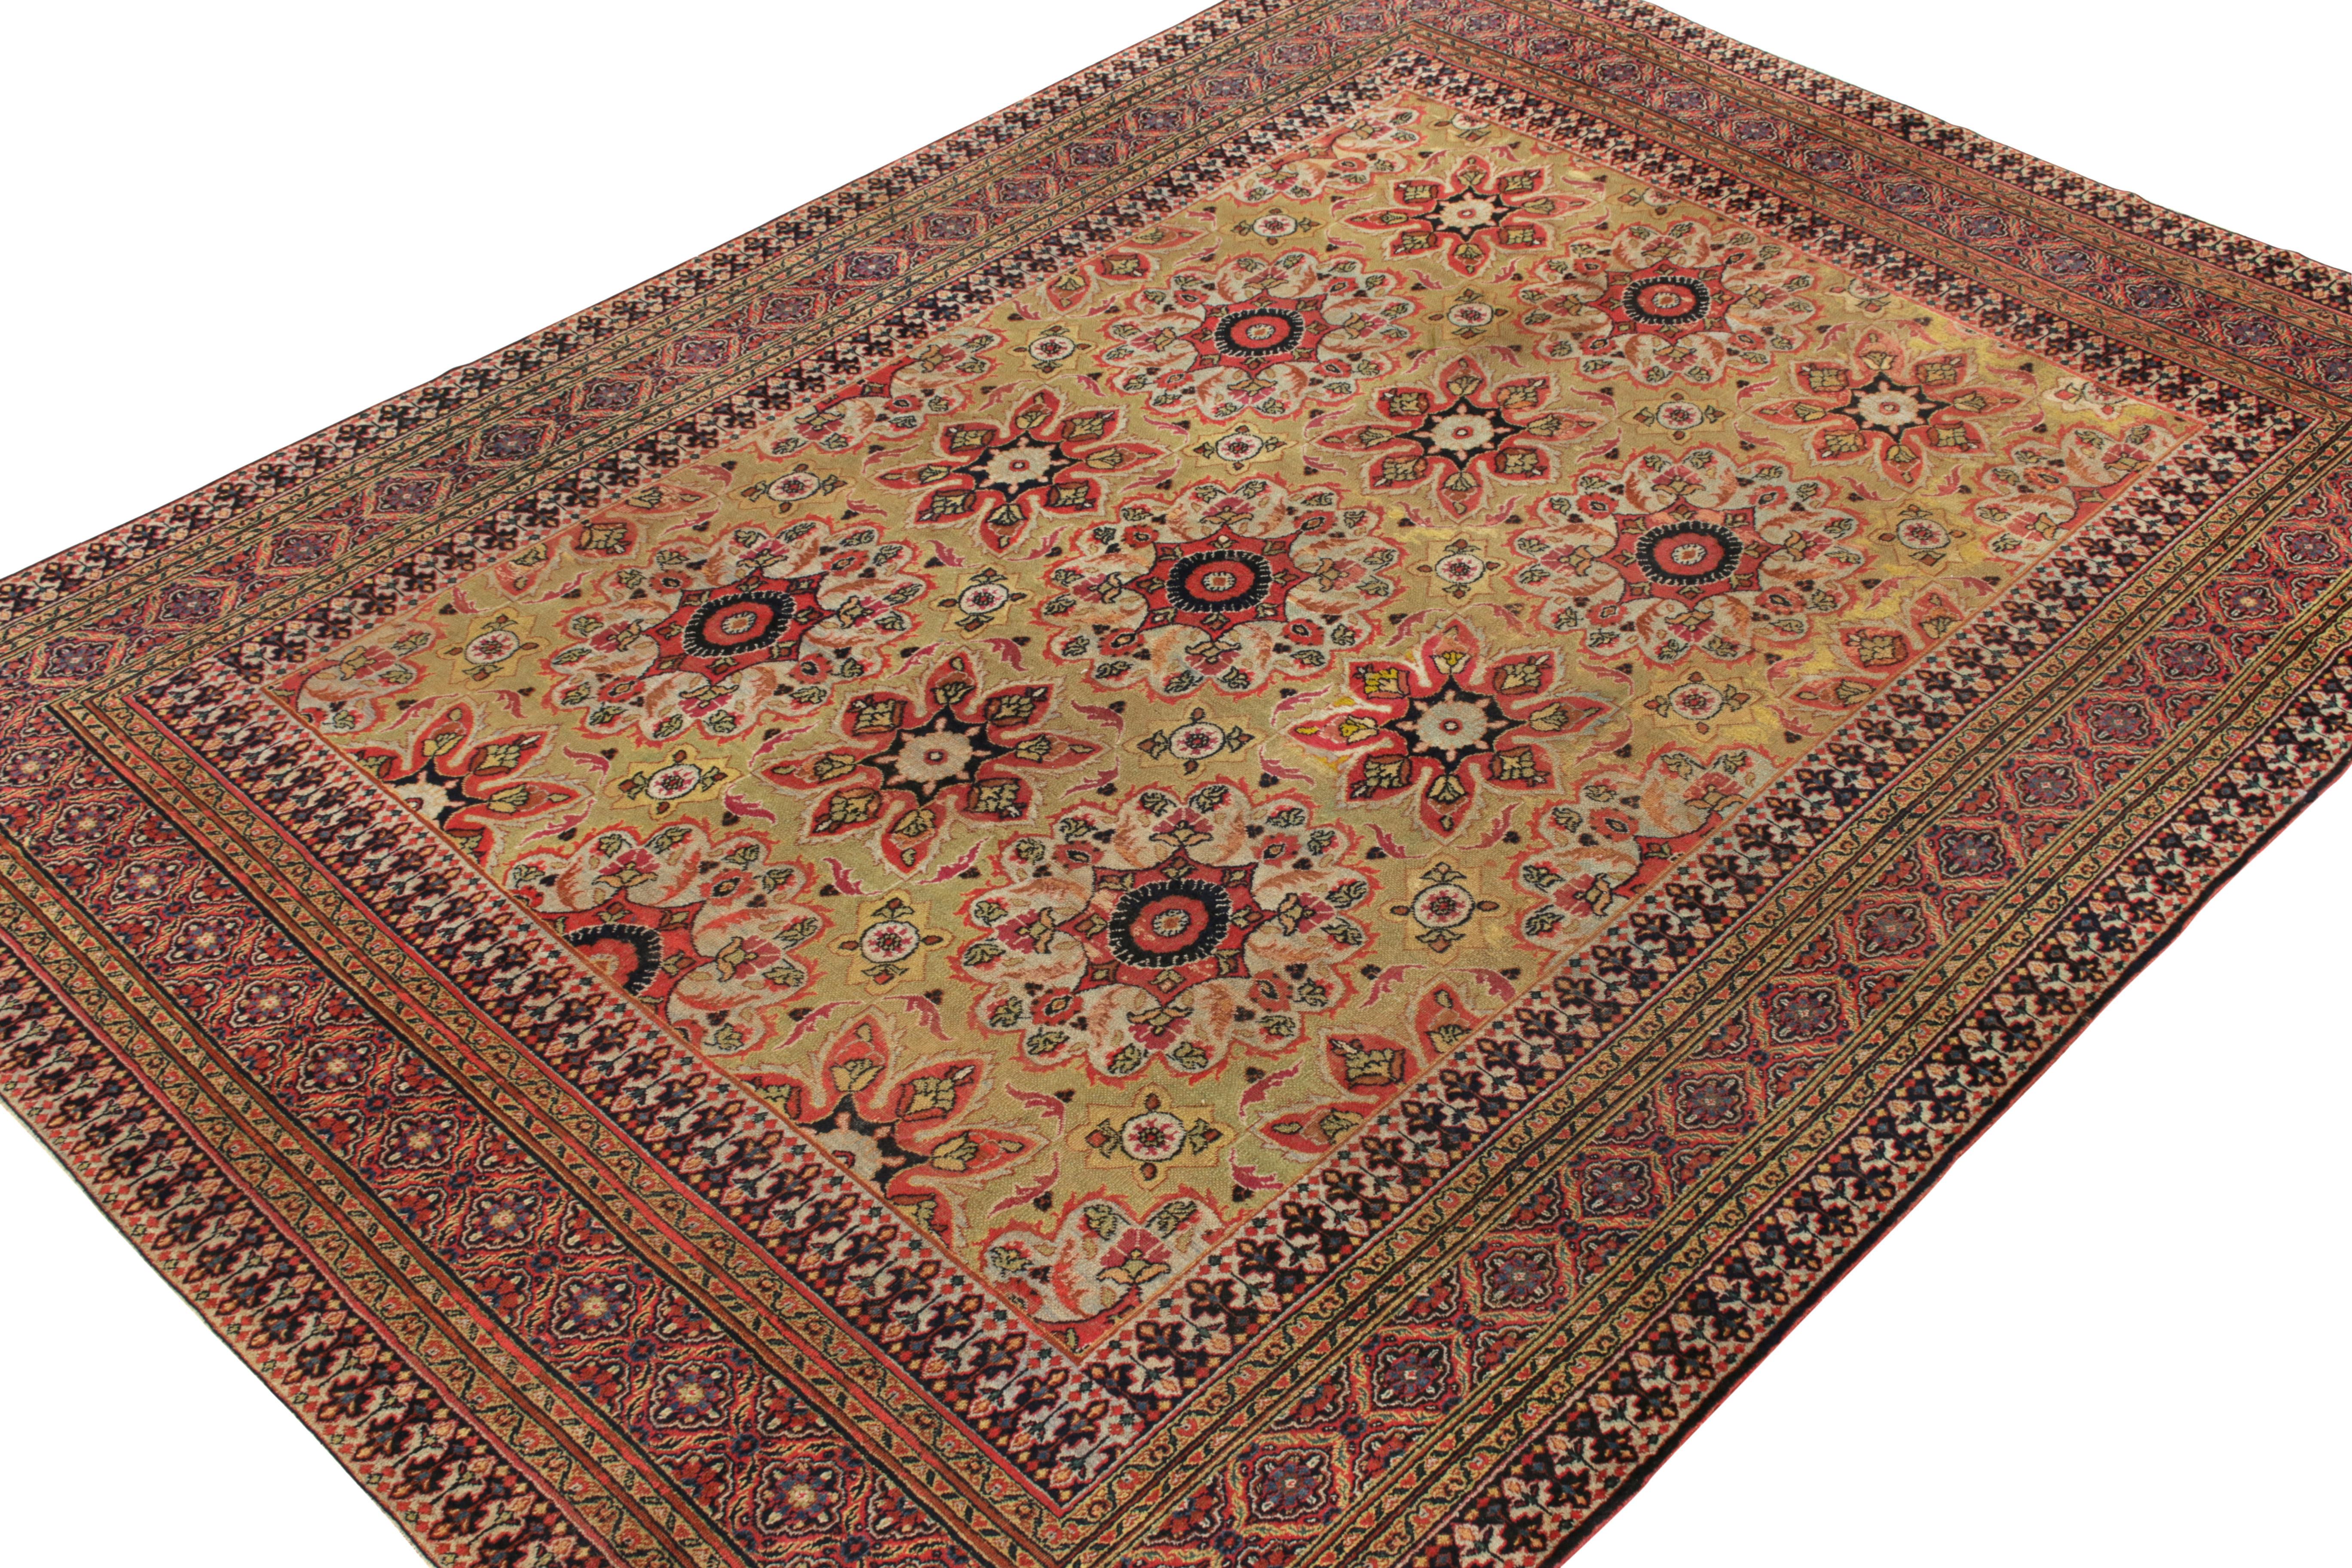 Indian Antique Khorassan Rug in All over Red, Green Floral Pattern by Rug & Kilim For Sale